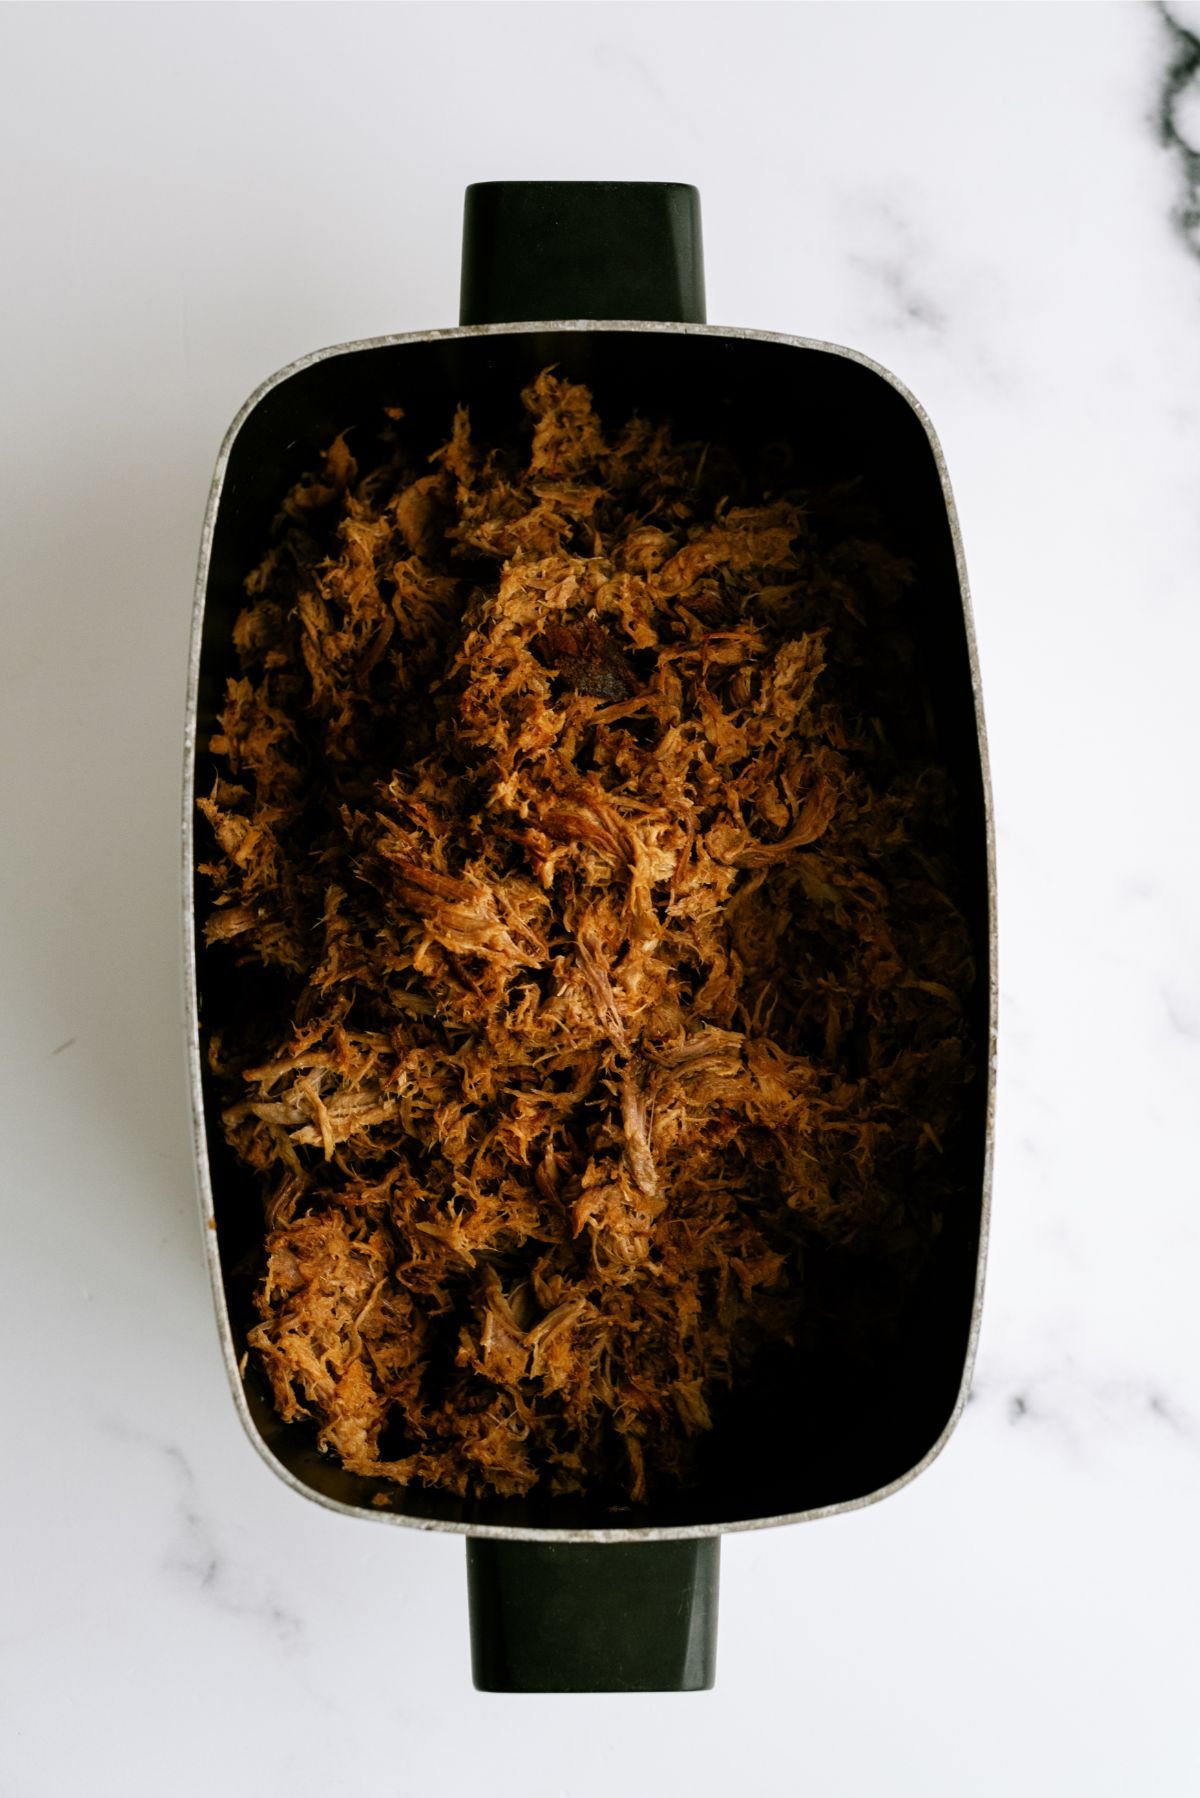 Slow cooker filled with shredded Slow Cooker Pineapple Pulled Pork